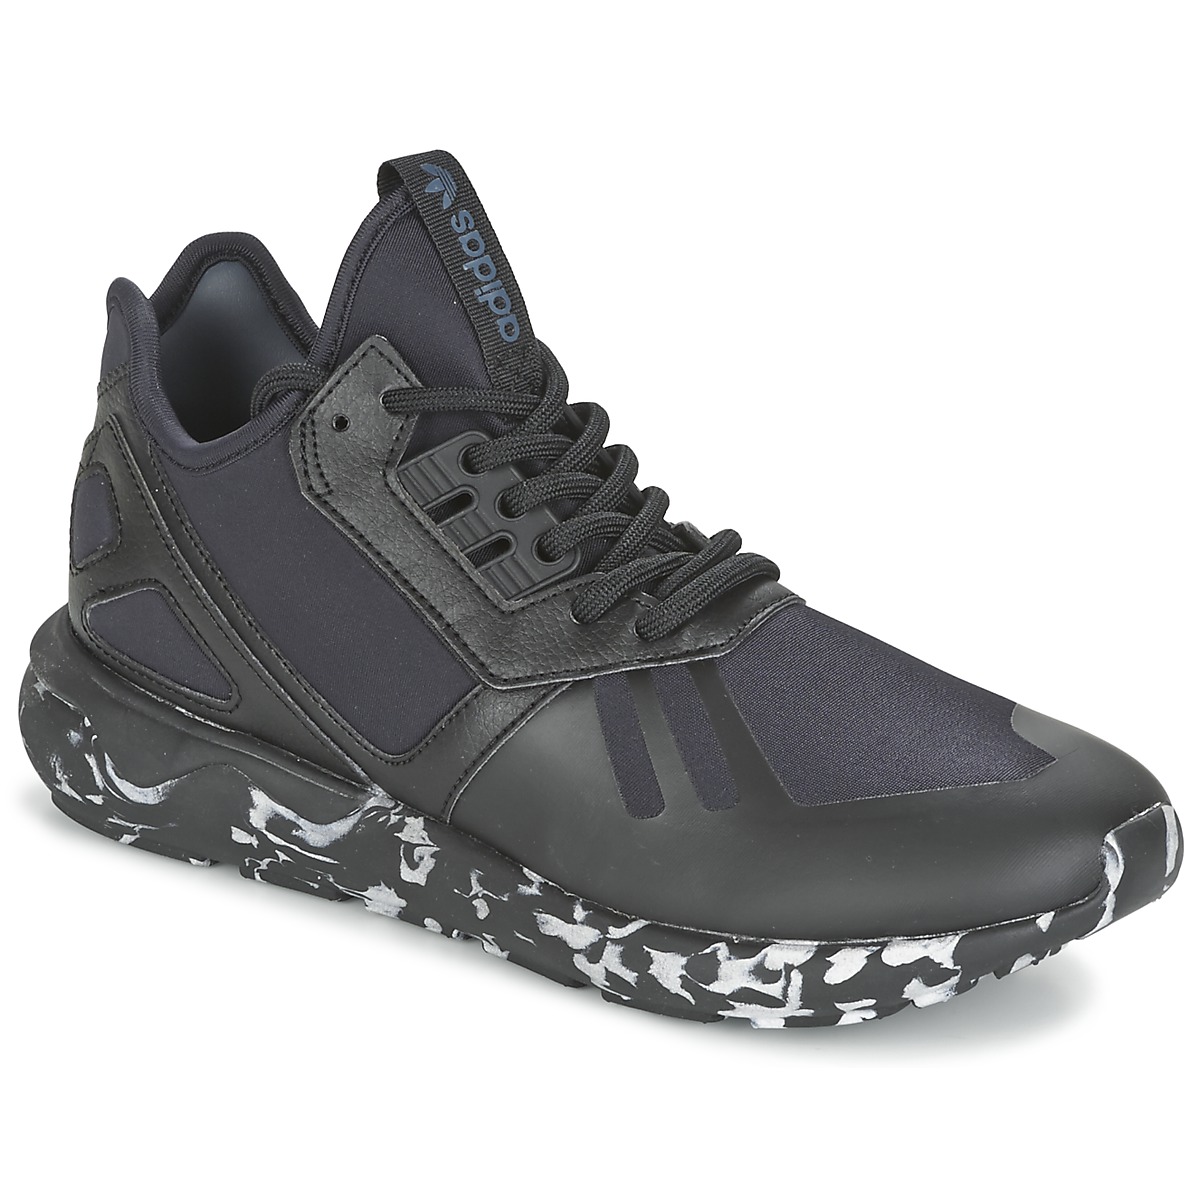 Chaussures adidas camouflage shoes india women TUBULAR RUNNER Noir